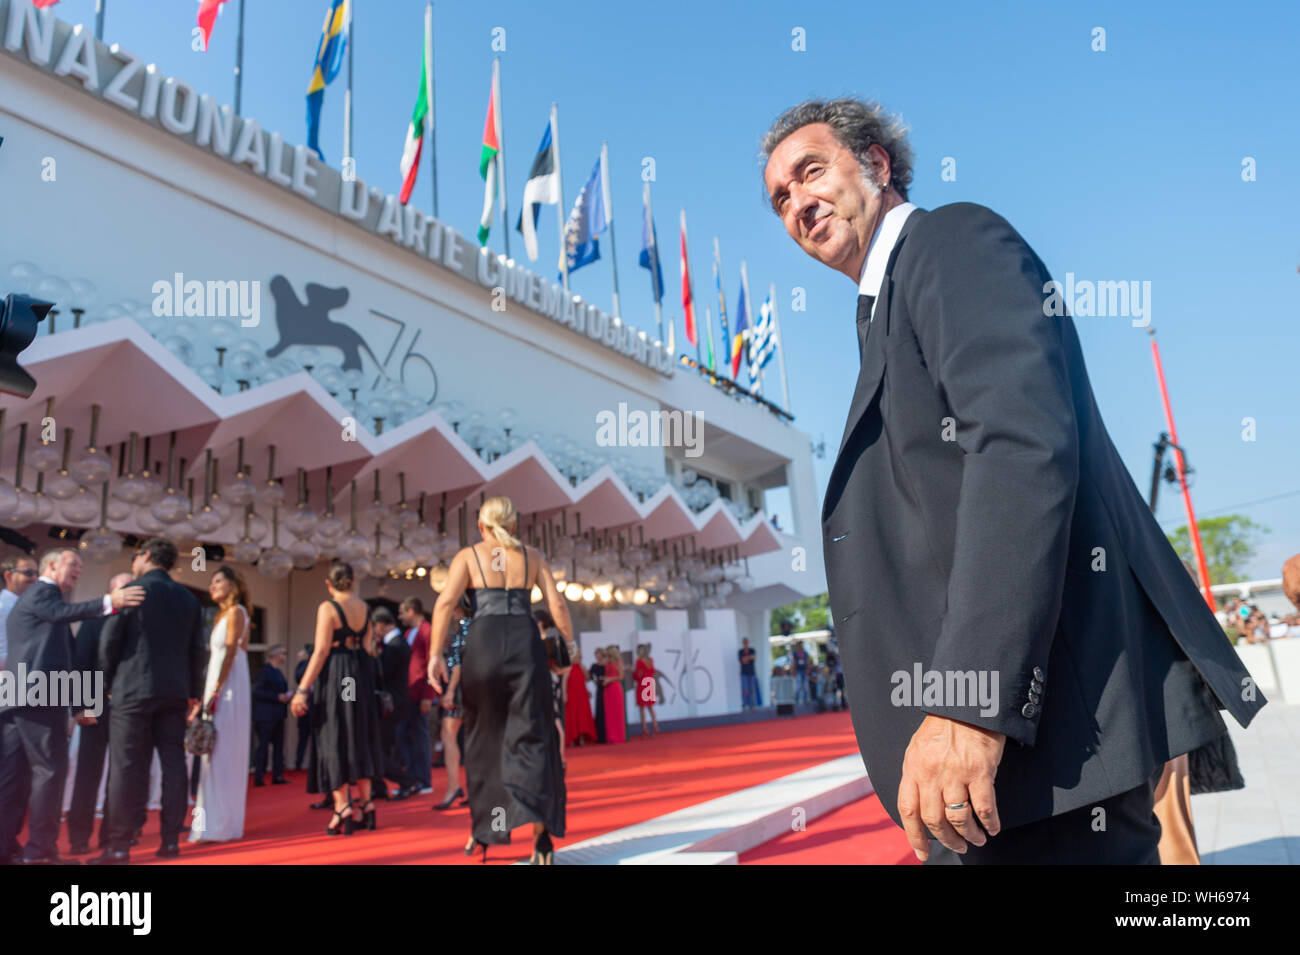 VENICE, ITALY - 01st September, 2019. Paolo Sorrentino attends the red carpet for the World Premiere of The New Pope during the 76th Venice Film Festival at Palazzo del Cinema on September 01, 2019 in Venice, Italy. © Roberto Ricciuti/Awakening/Alamy Live News Stock Photo